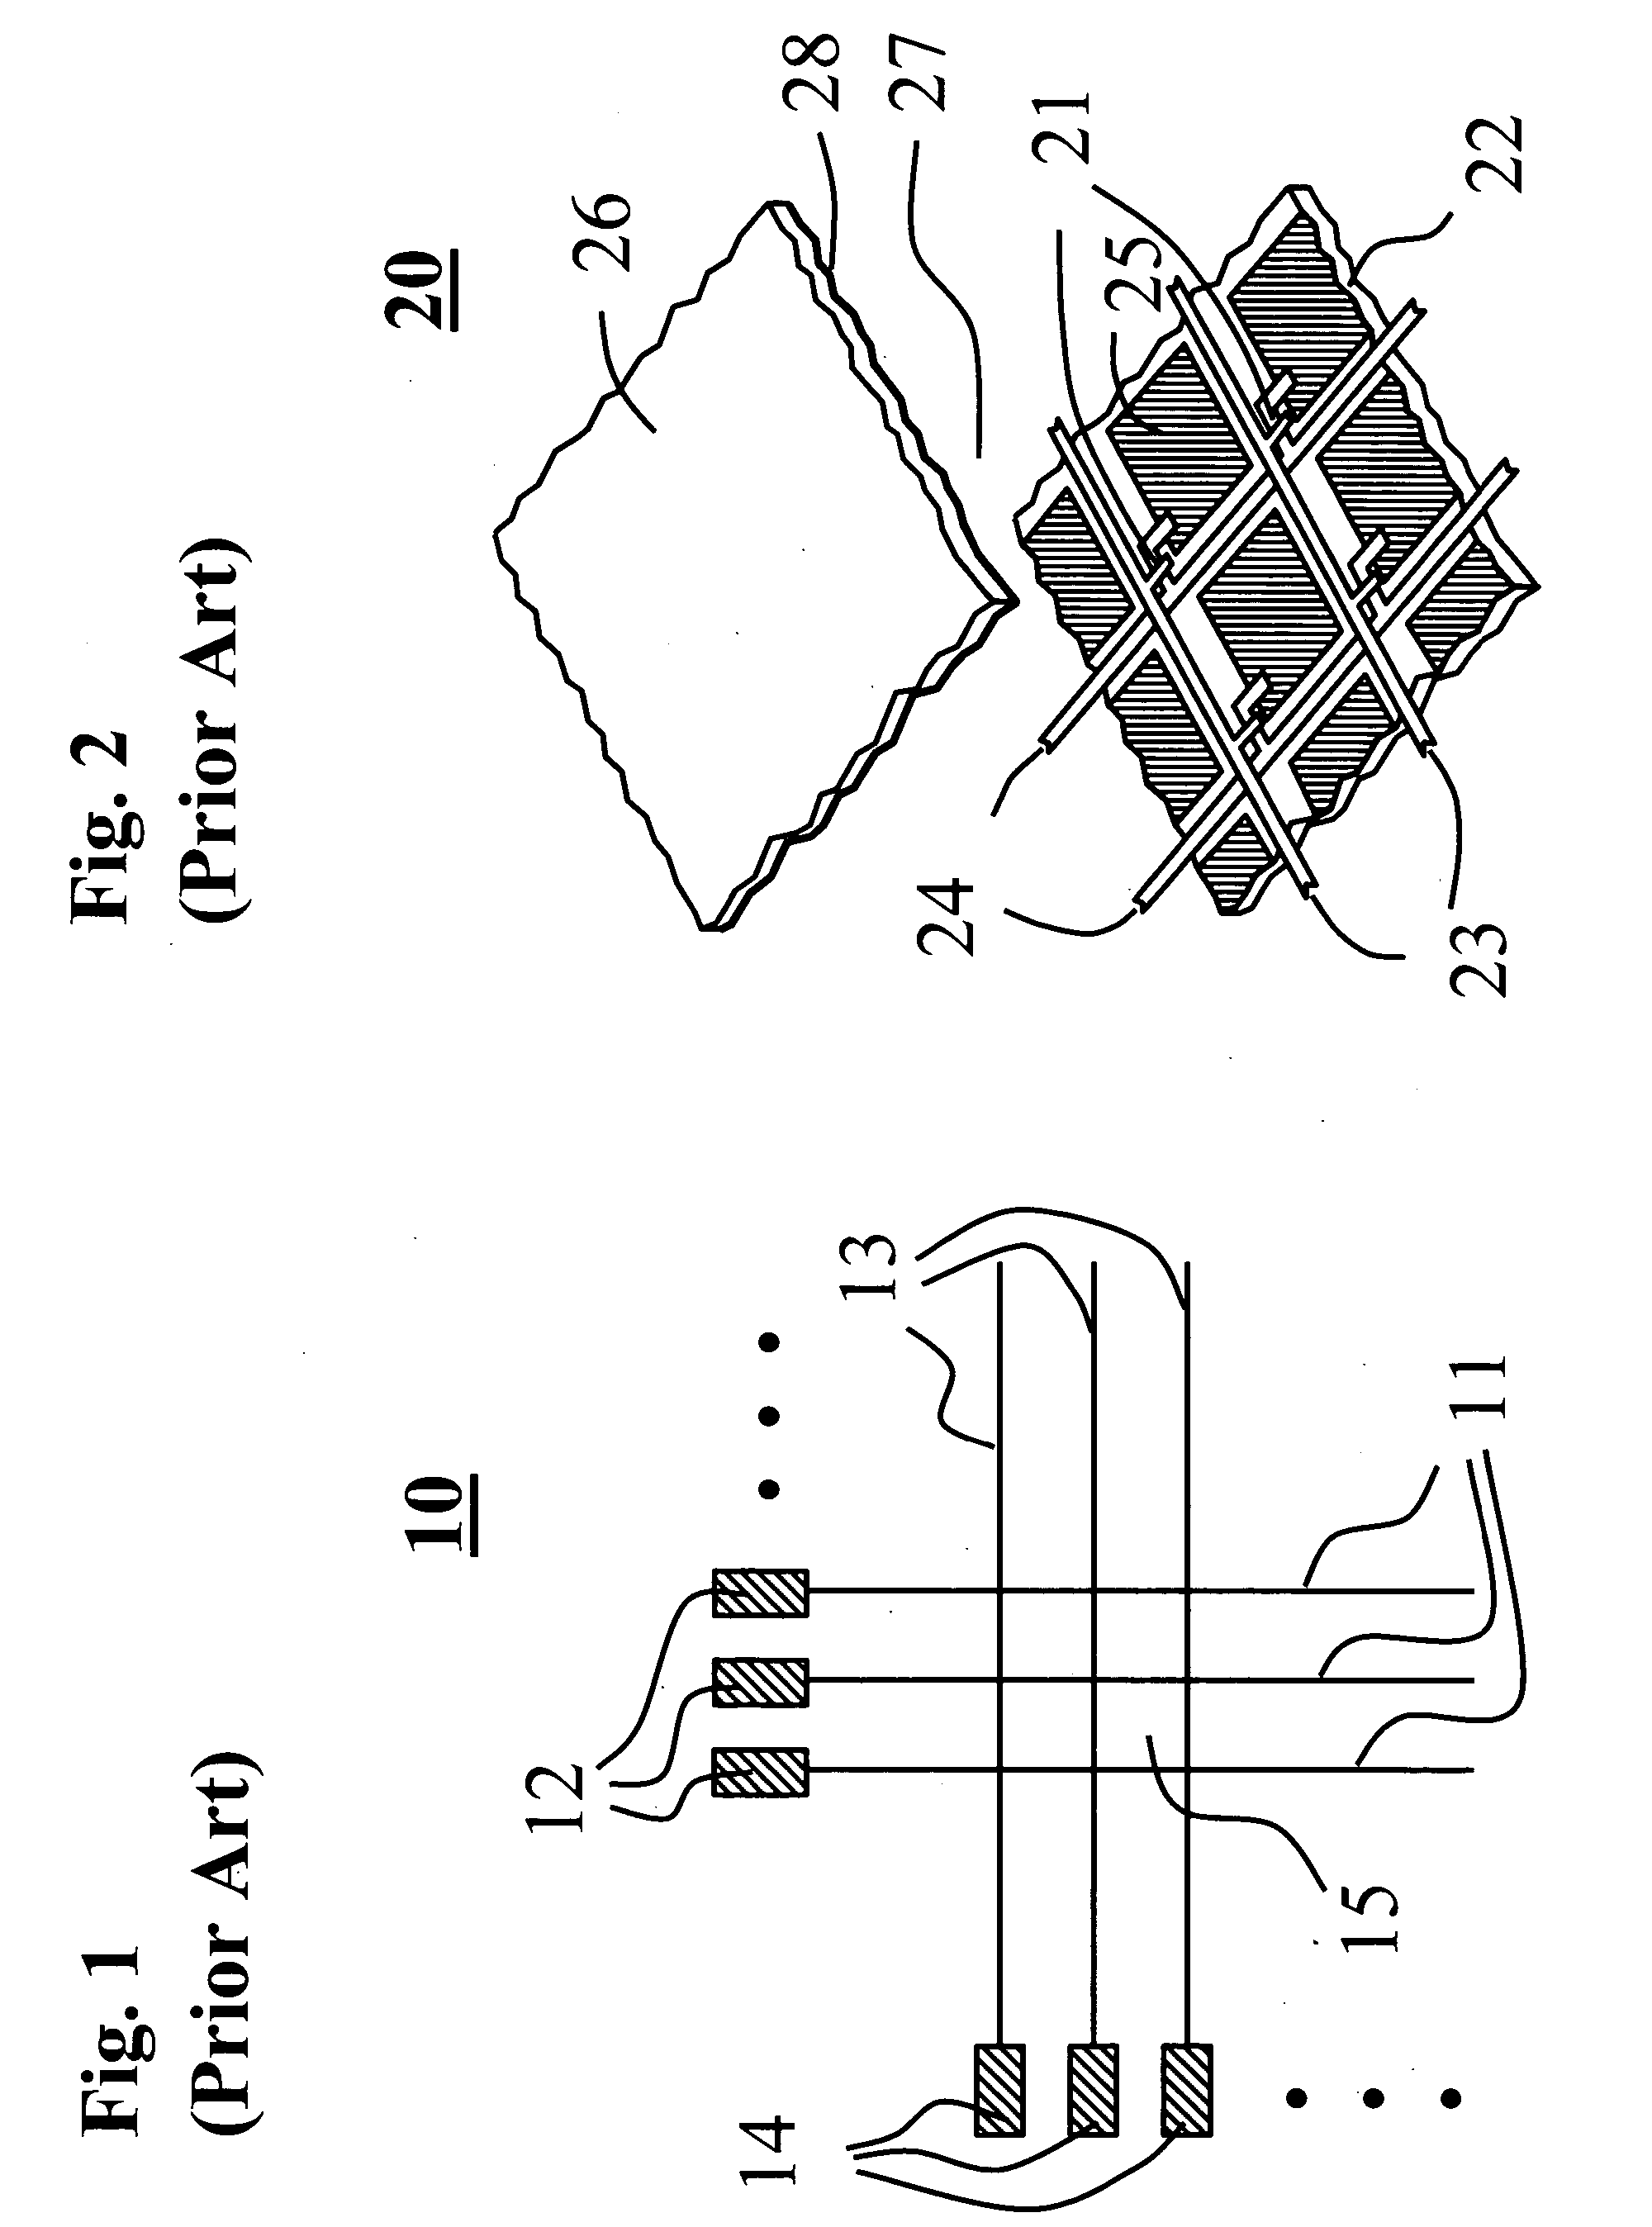 Indium oxide-based thin film transistors and circuits